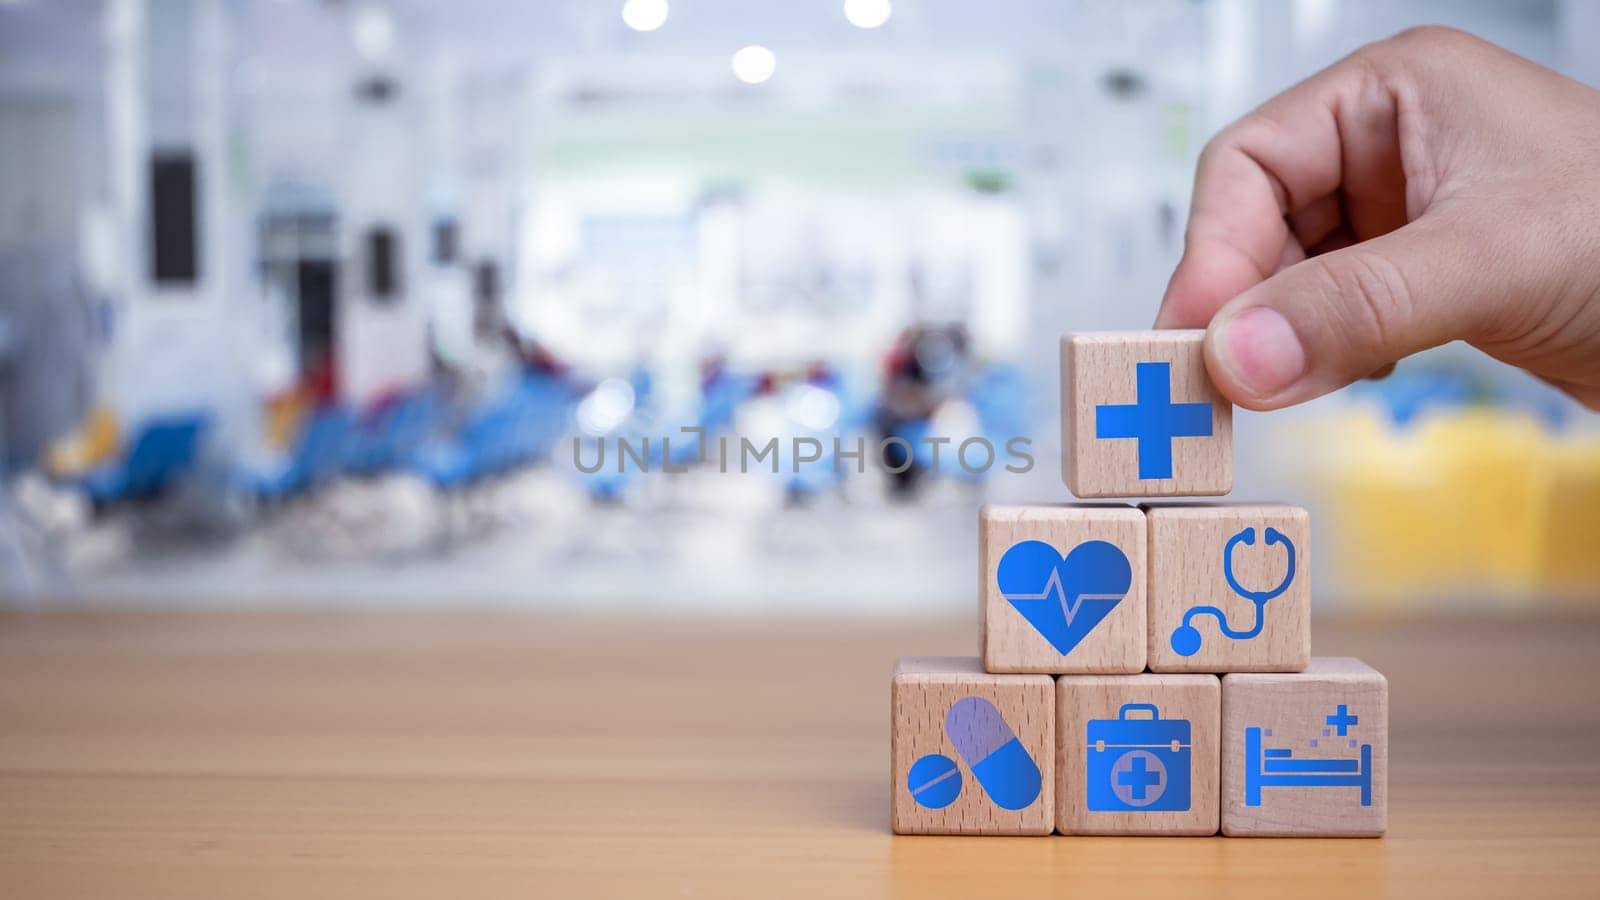 Health insurance and healthcare concept, human hand holds wooden block with icons about health insurance and healthcare access, retirement planning on wooden background. by Unimages2527